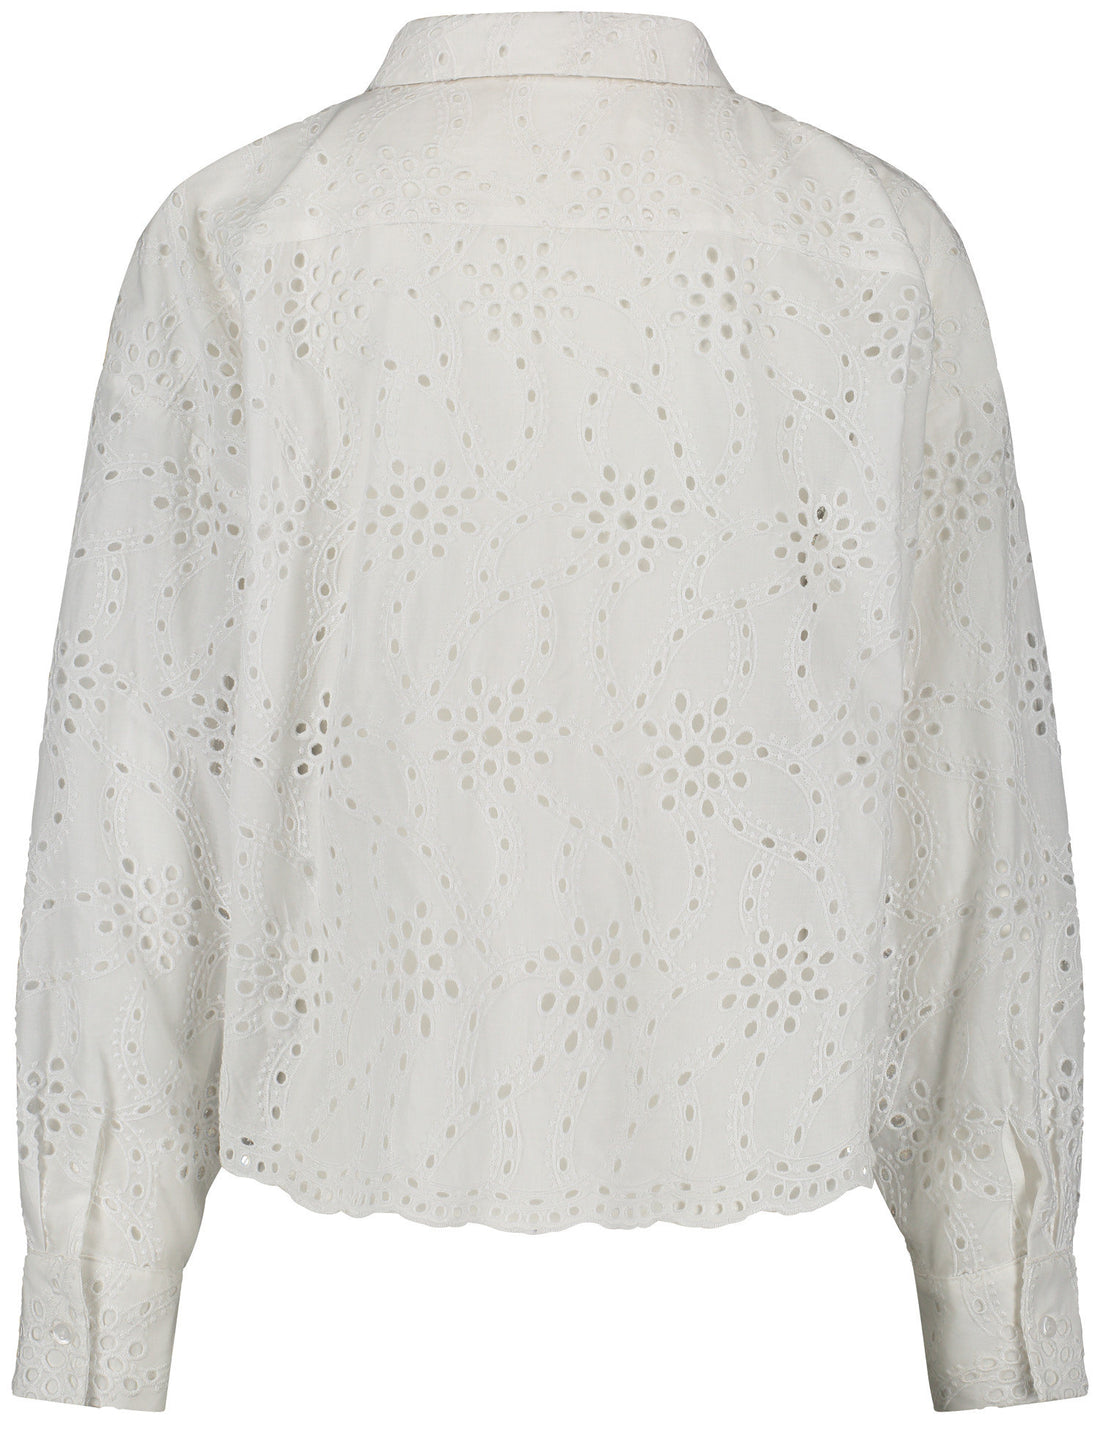 Blouse With A Decorative Openwork Pattern_360050-31446_99600_02